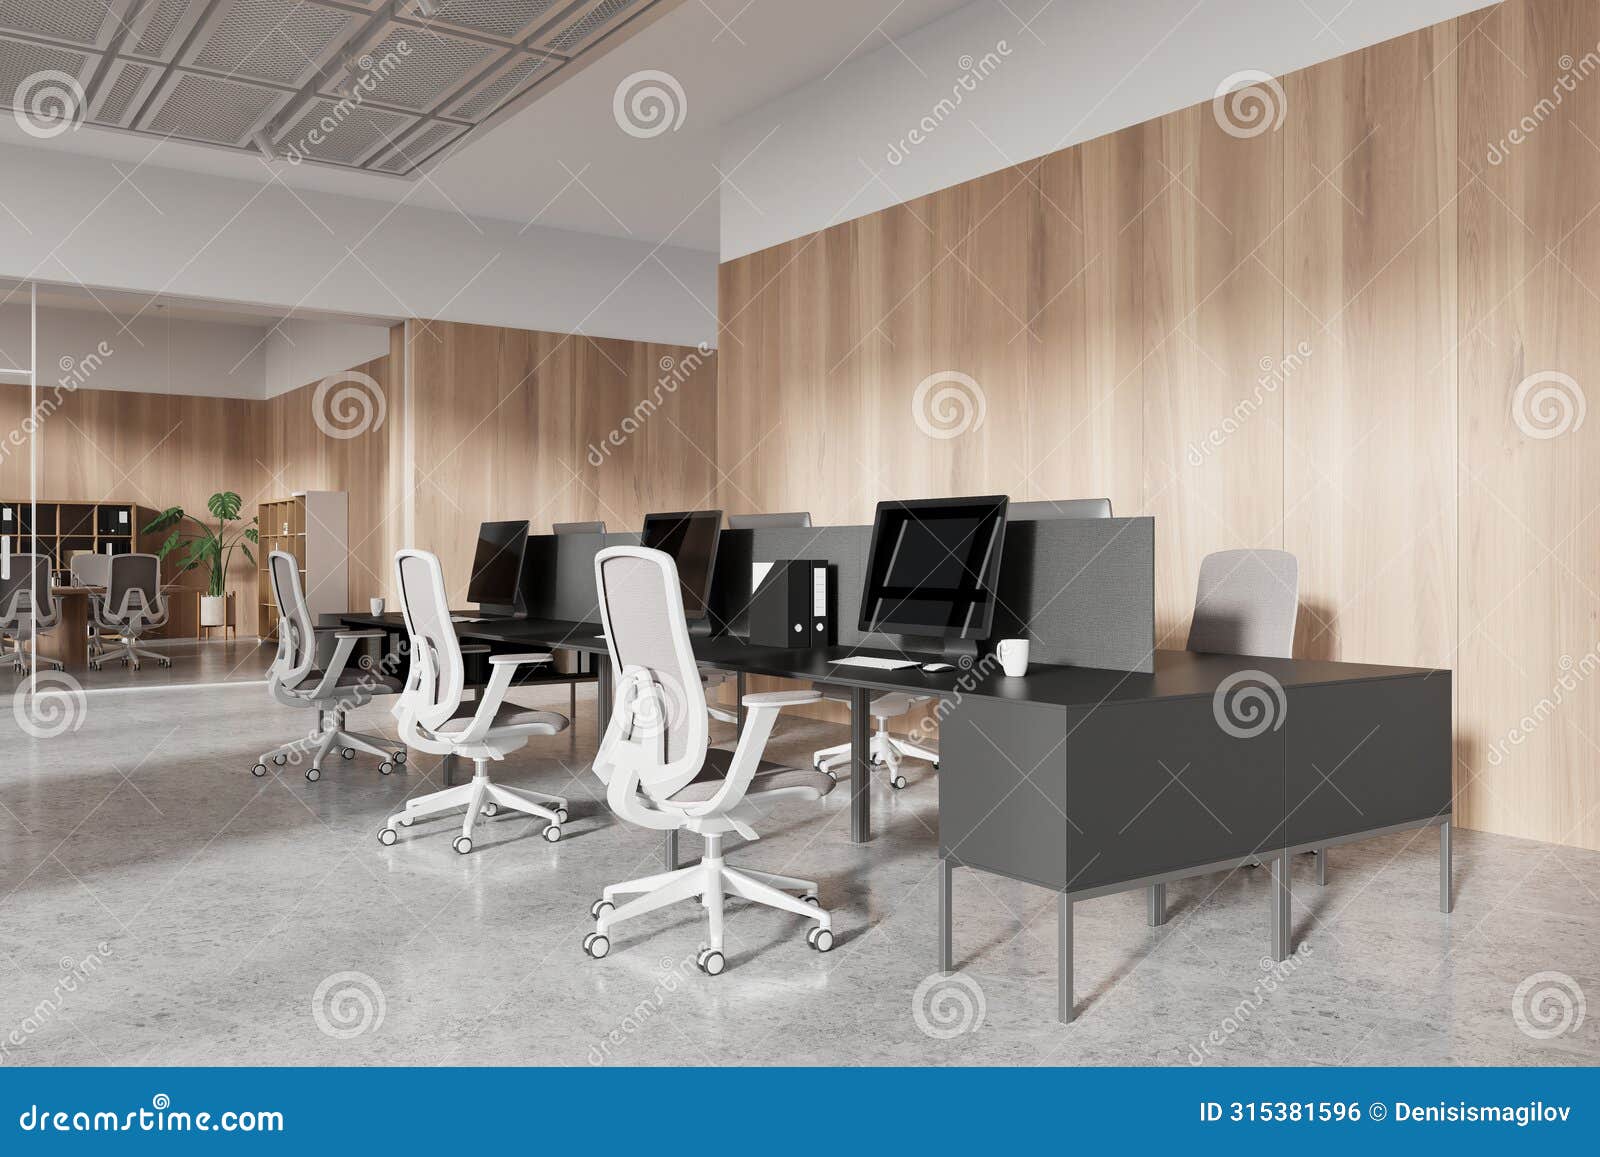 a modern office interior with desks, chairs, computers, and decorative plants against a wooden wall and glass partitions, concept